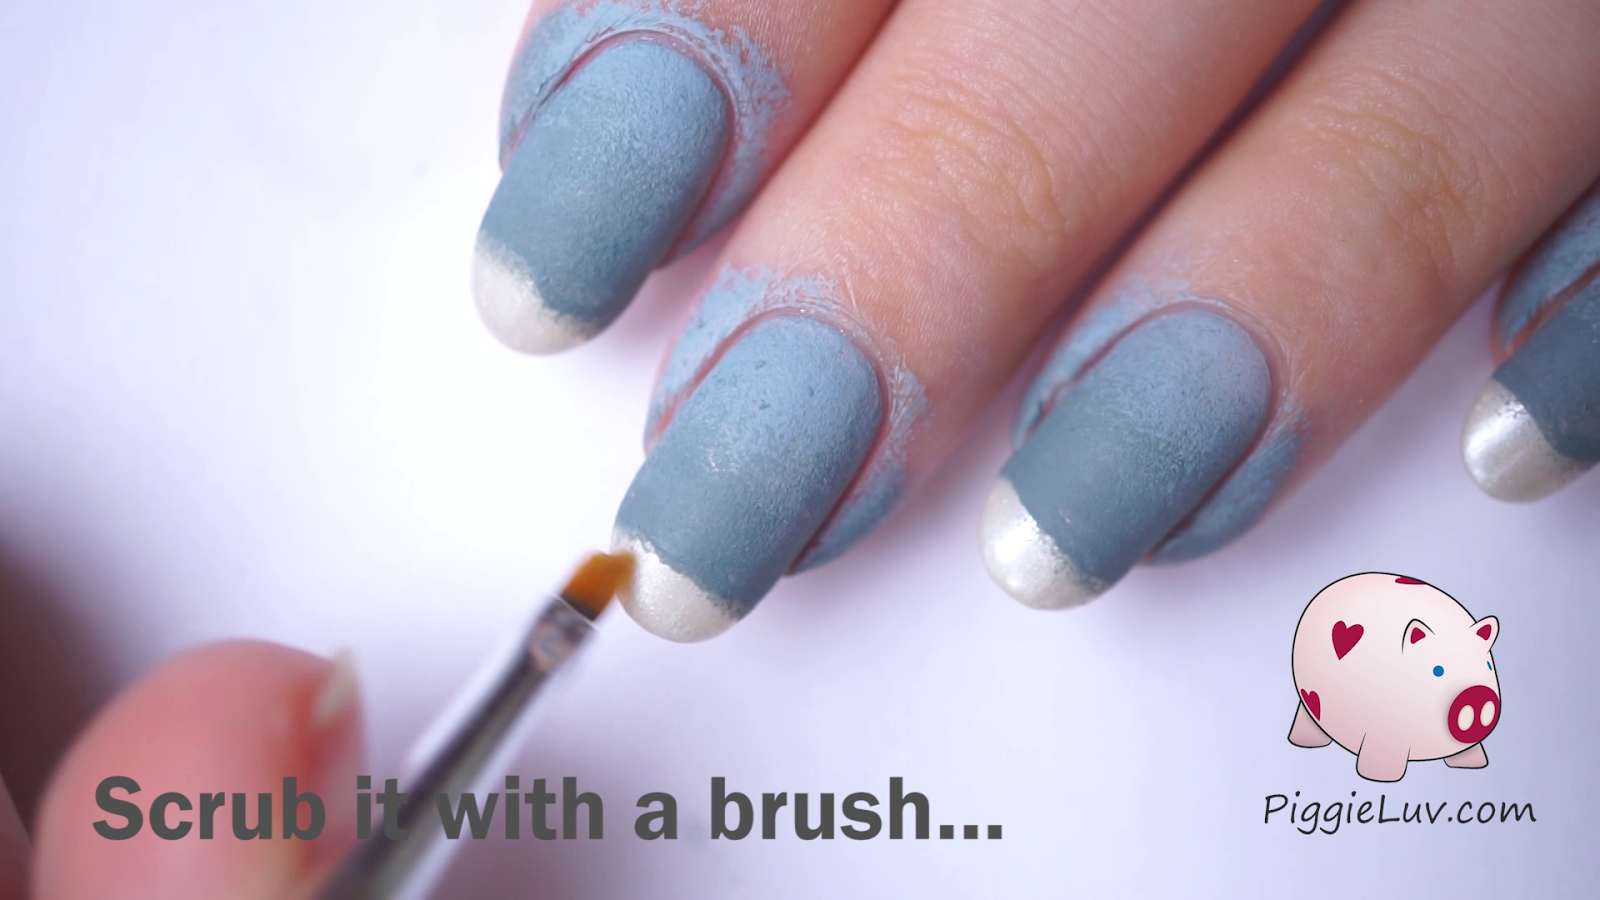 PiggieLuv: Behind The Nail Art - Fixing nail art mistakes